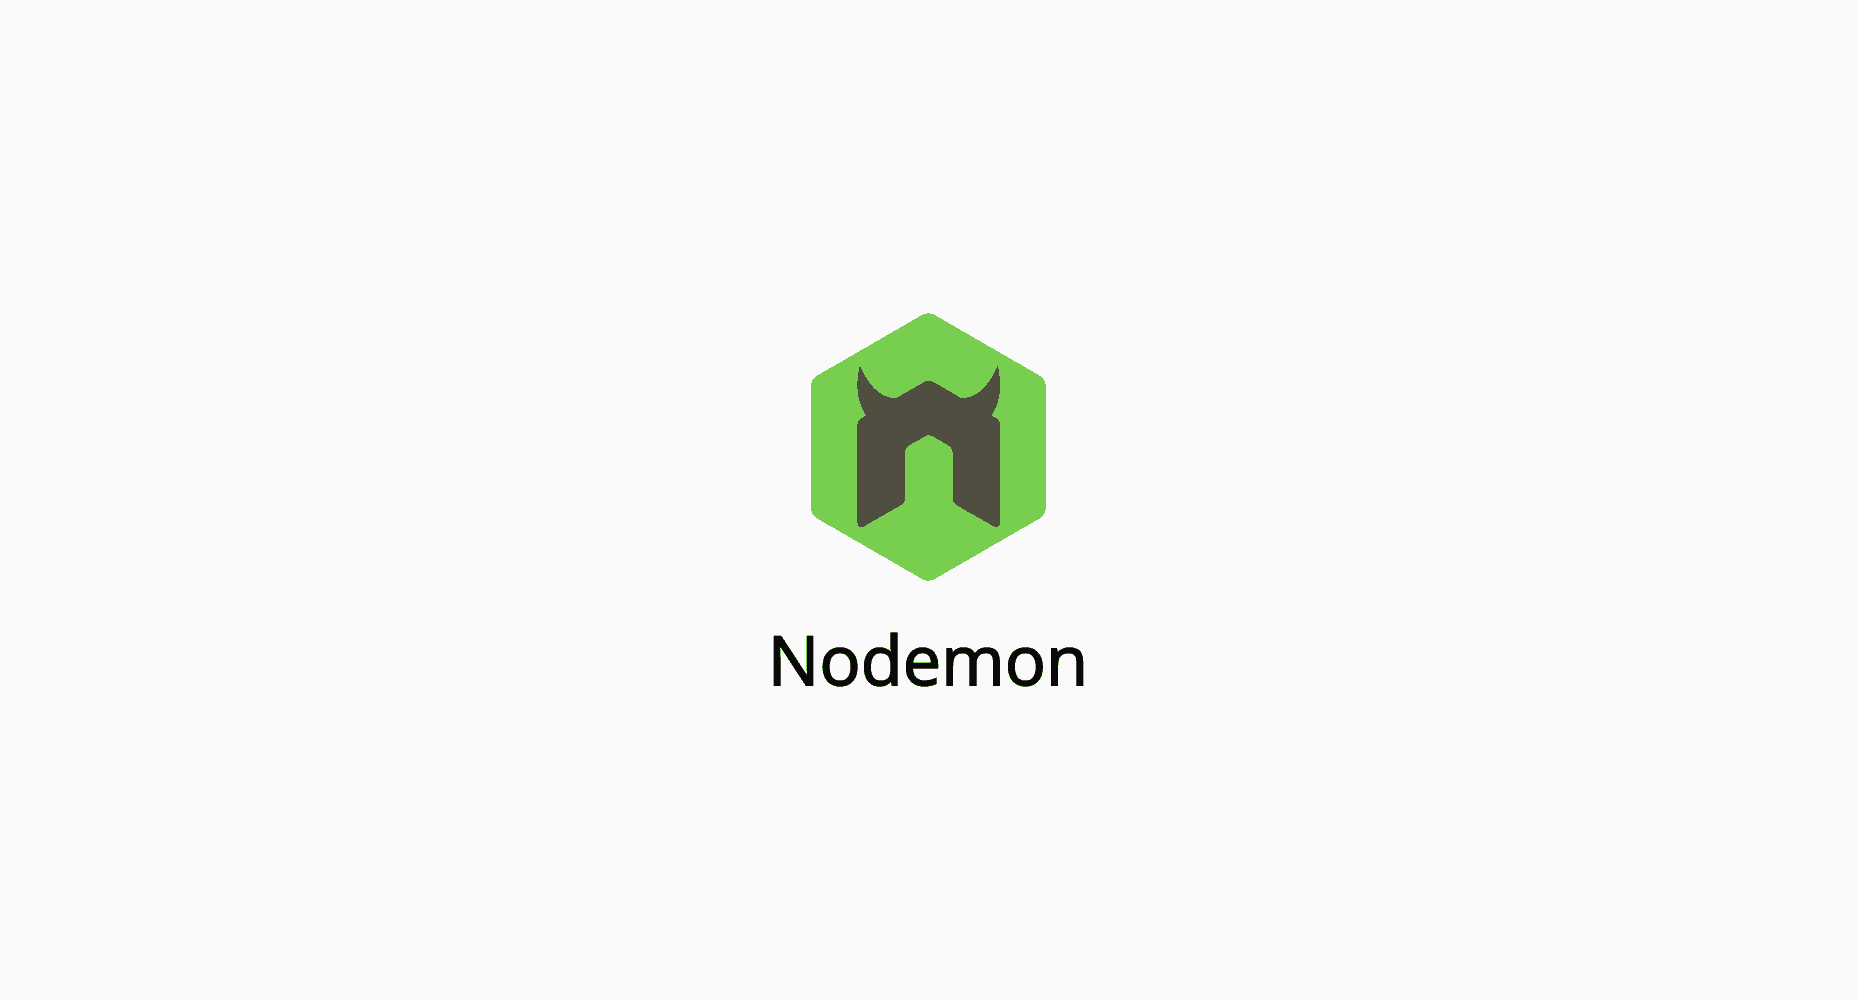 vscode 디버깅 with nodemon